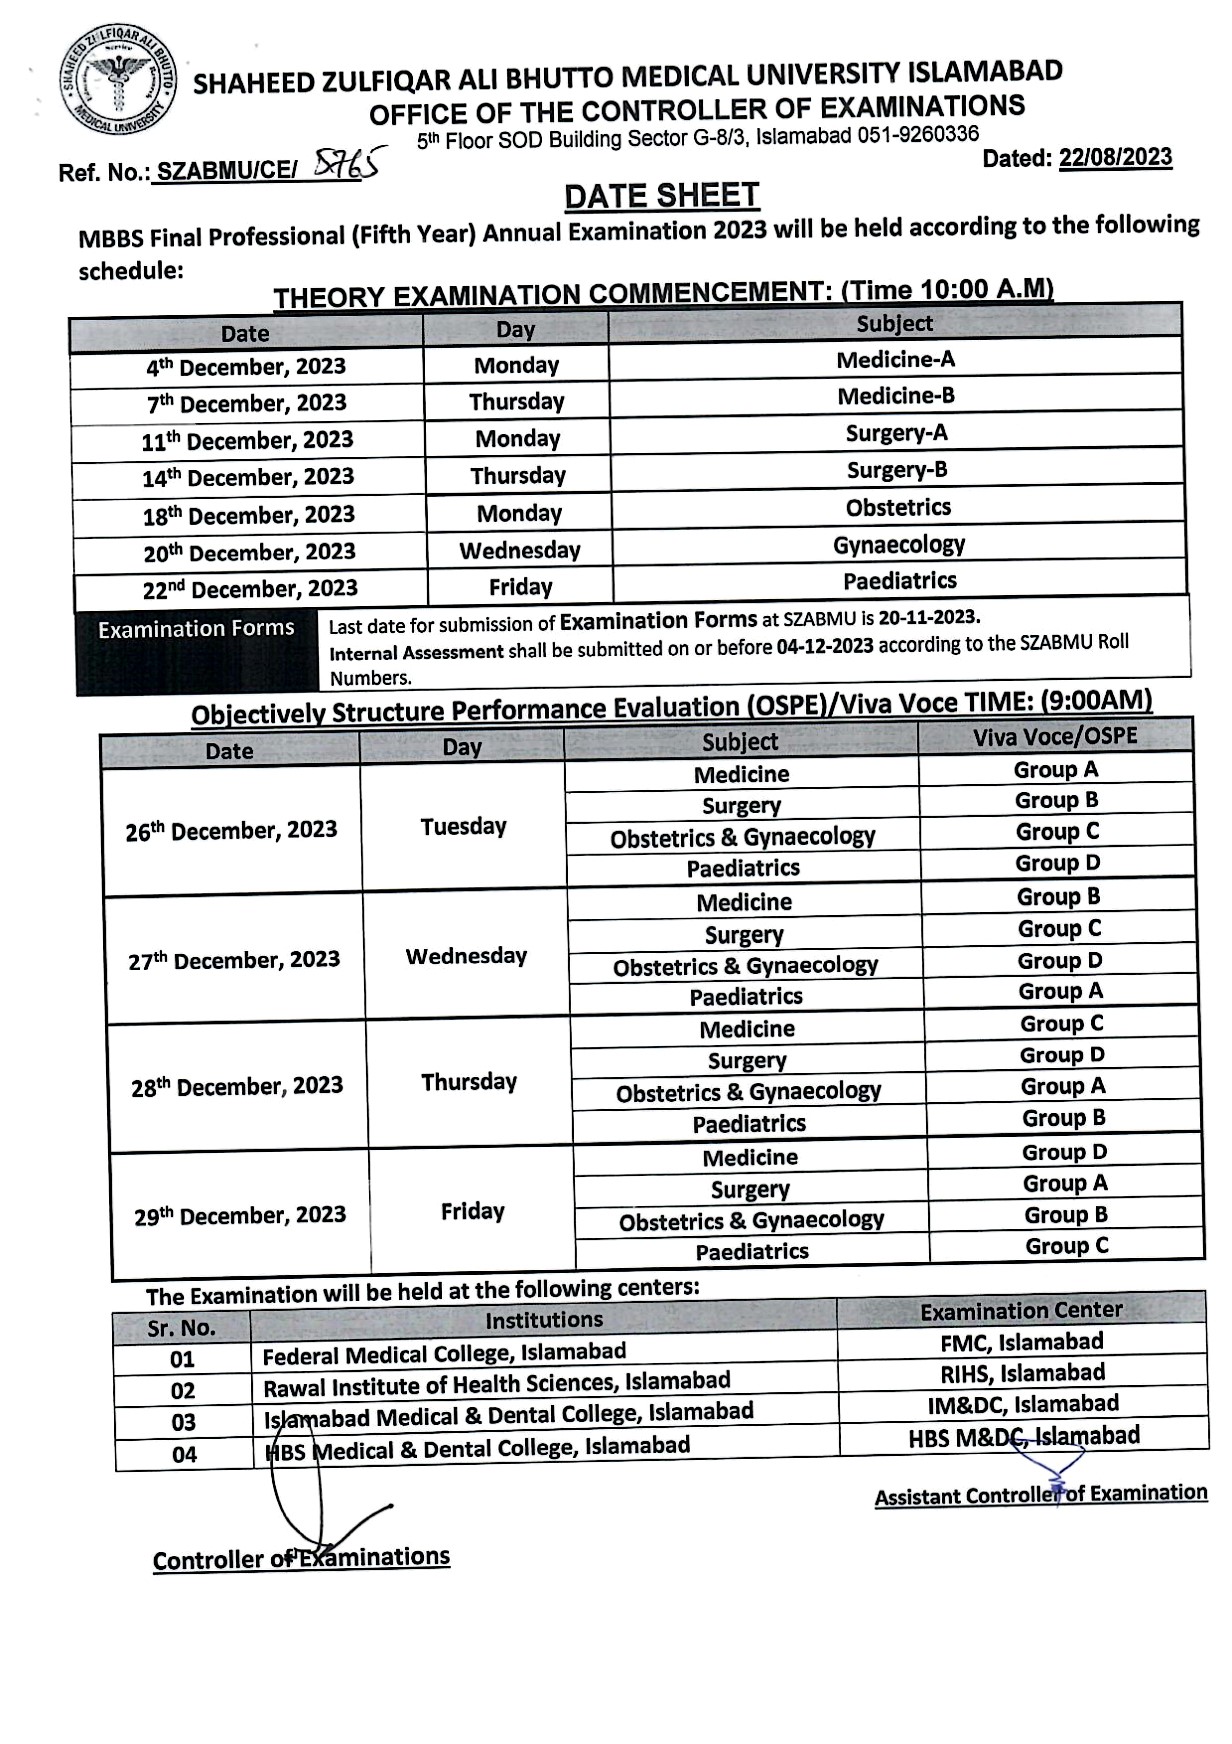 Date Sheet - MBBS All Professionals Annual Examinations 2023